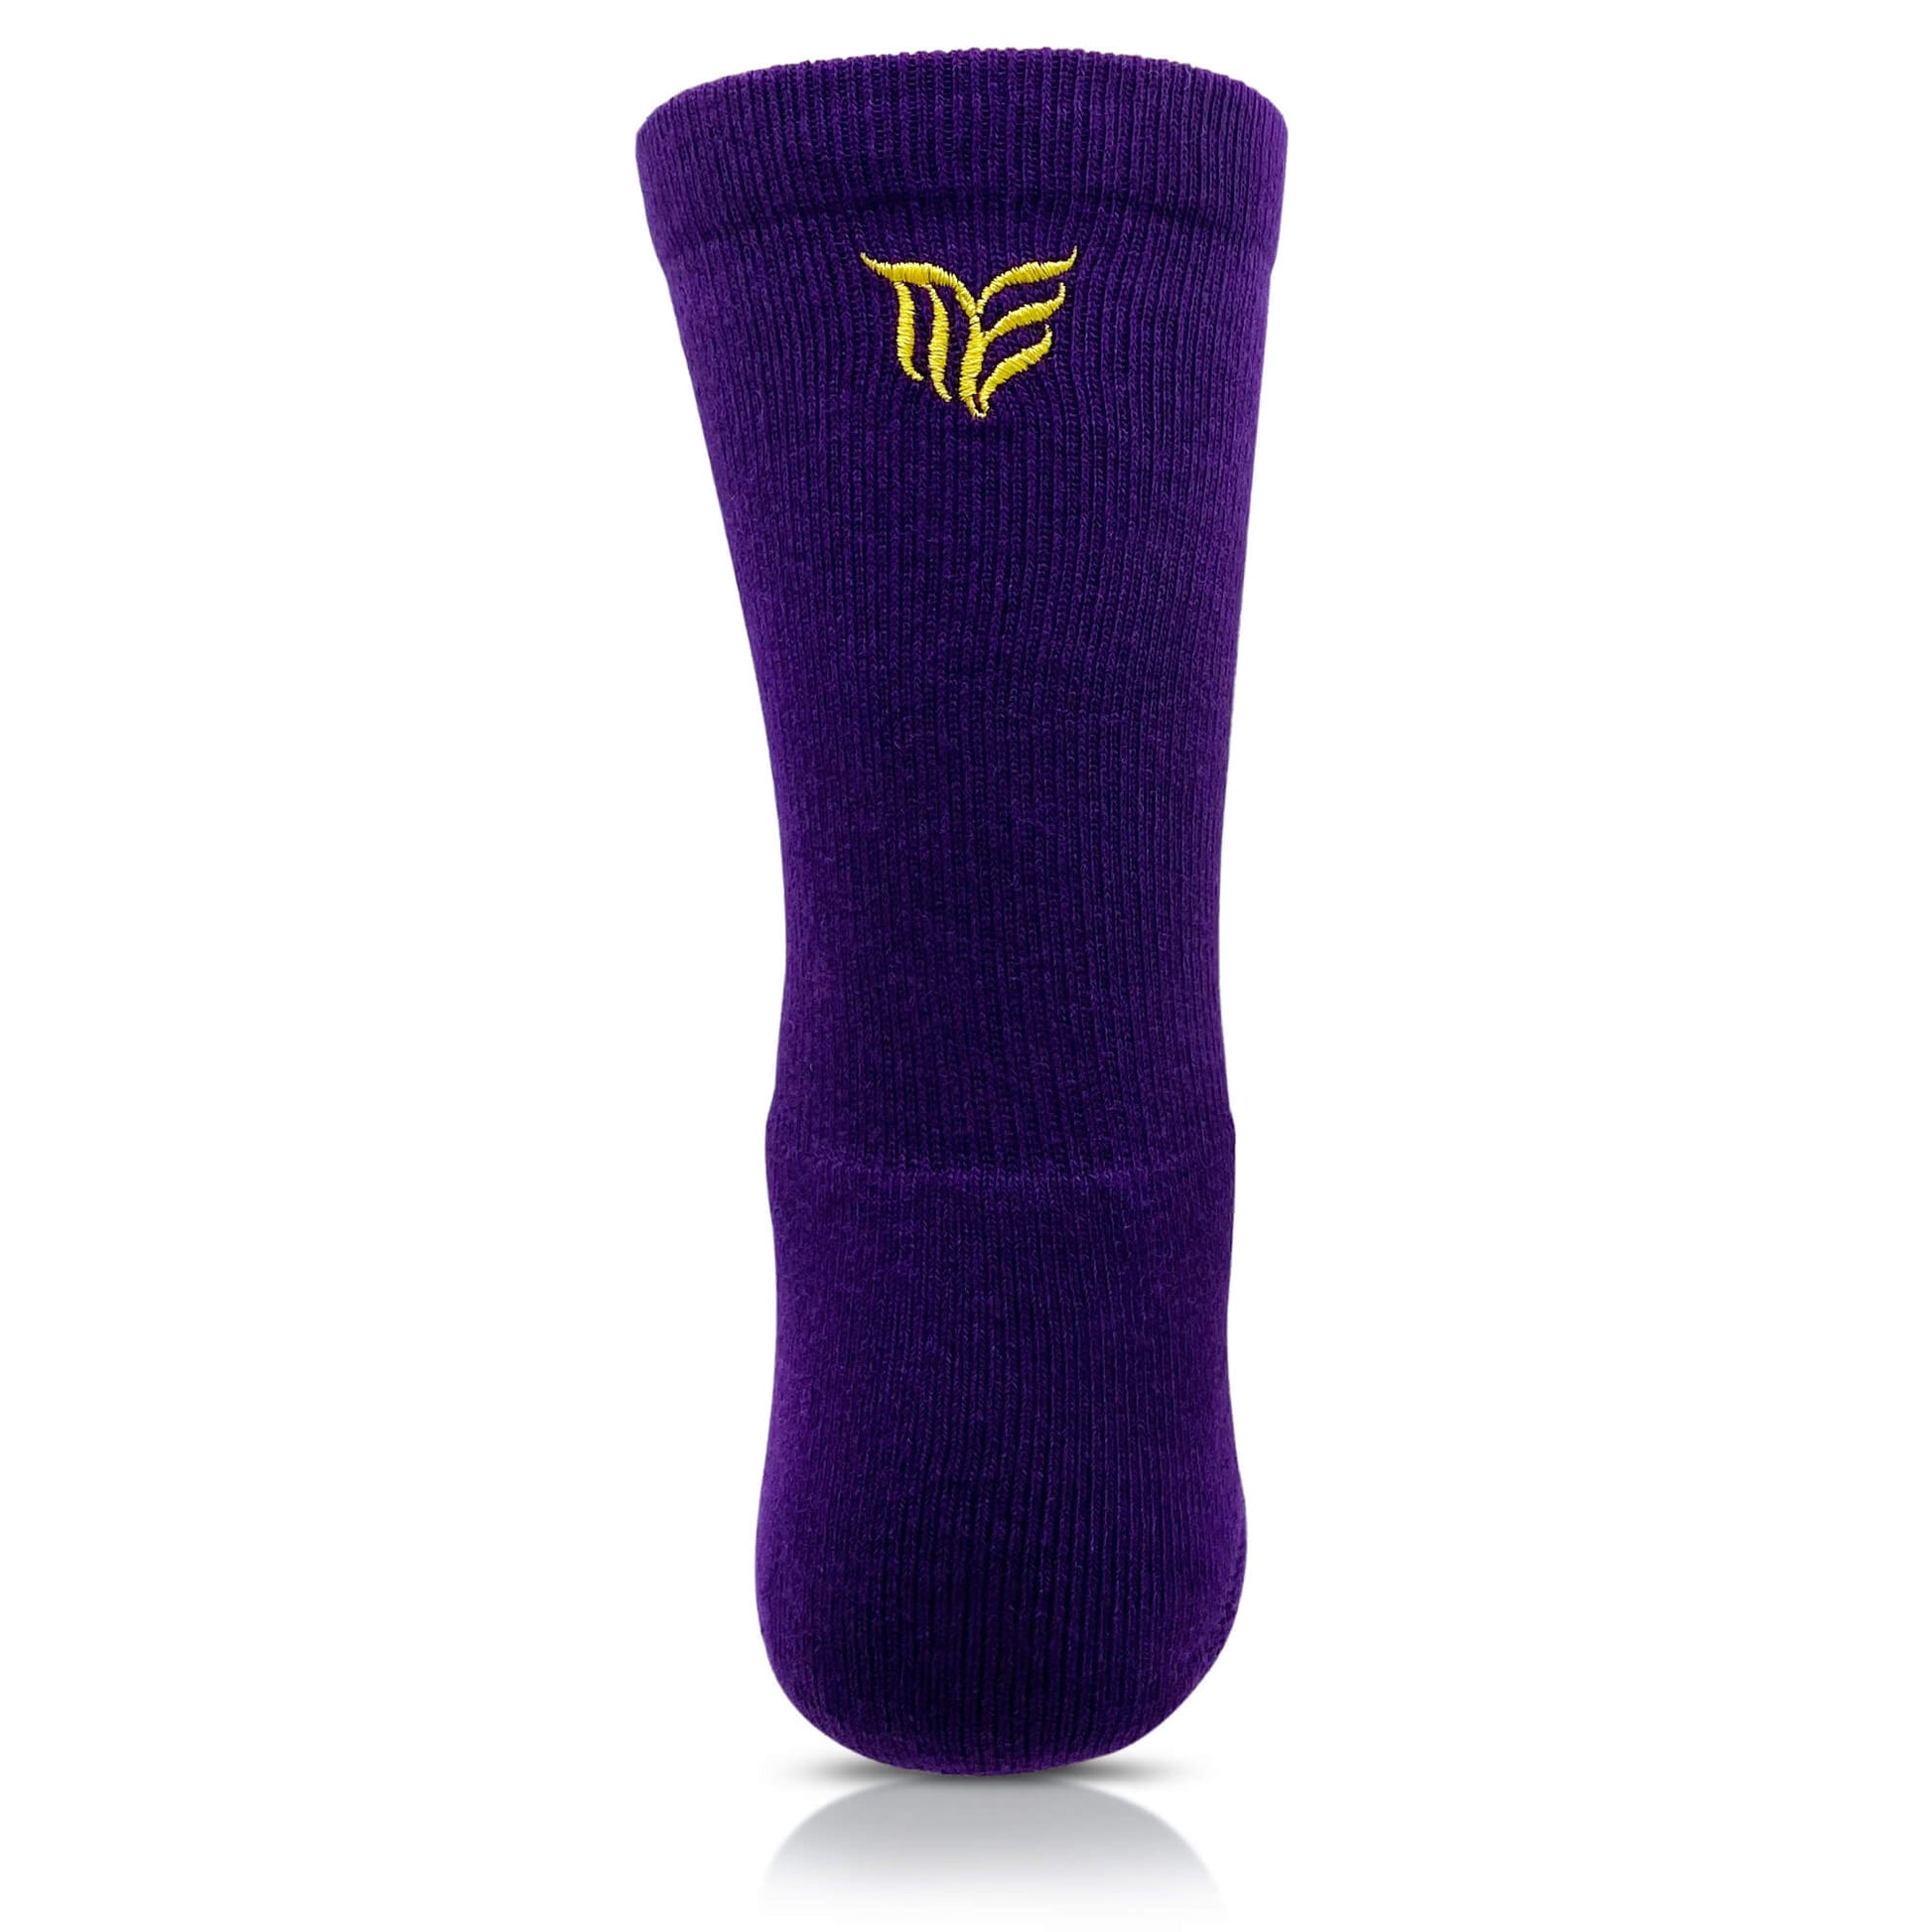 Modern Envy comfy crew socks Purple and Gold back view